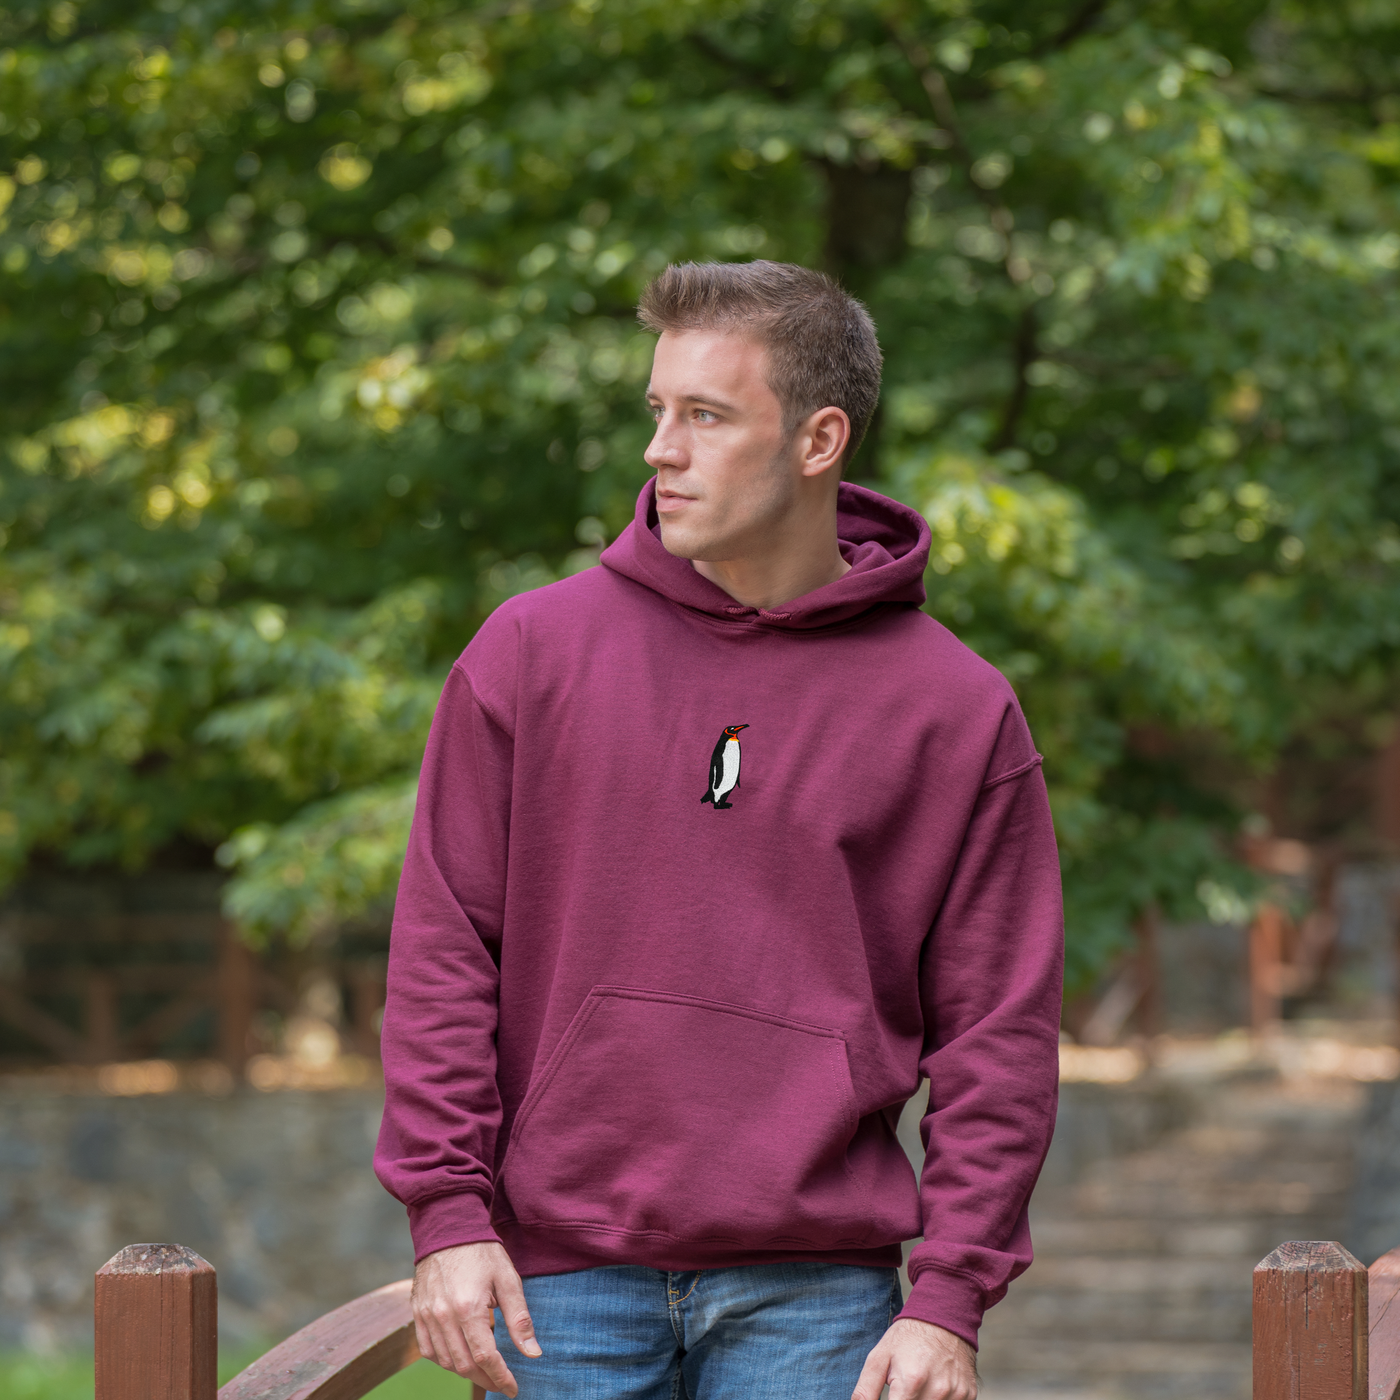 Bobby's Planet Men's Embroidered Penguin Hoodie from Arctic Polar Animals Collection in Maroon Color#color_maroon